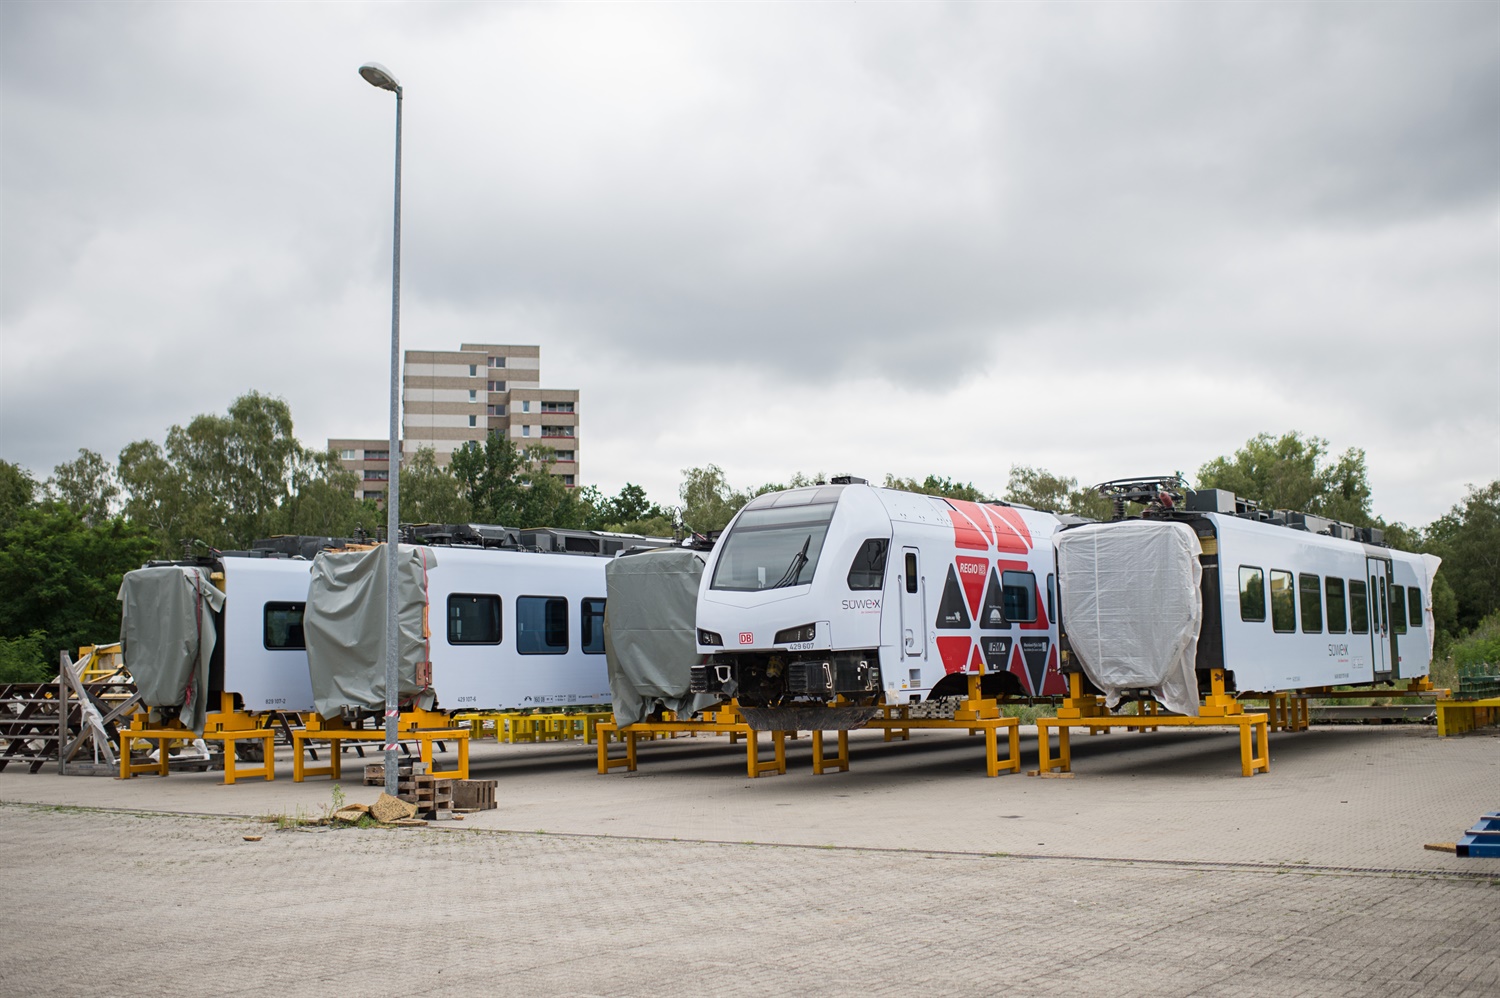 Greater Anglia’s new trains rolled out for testing in Europe